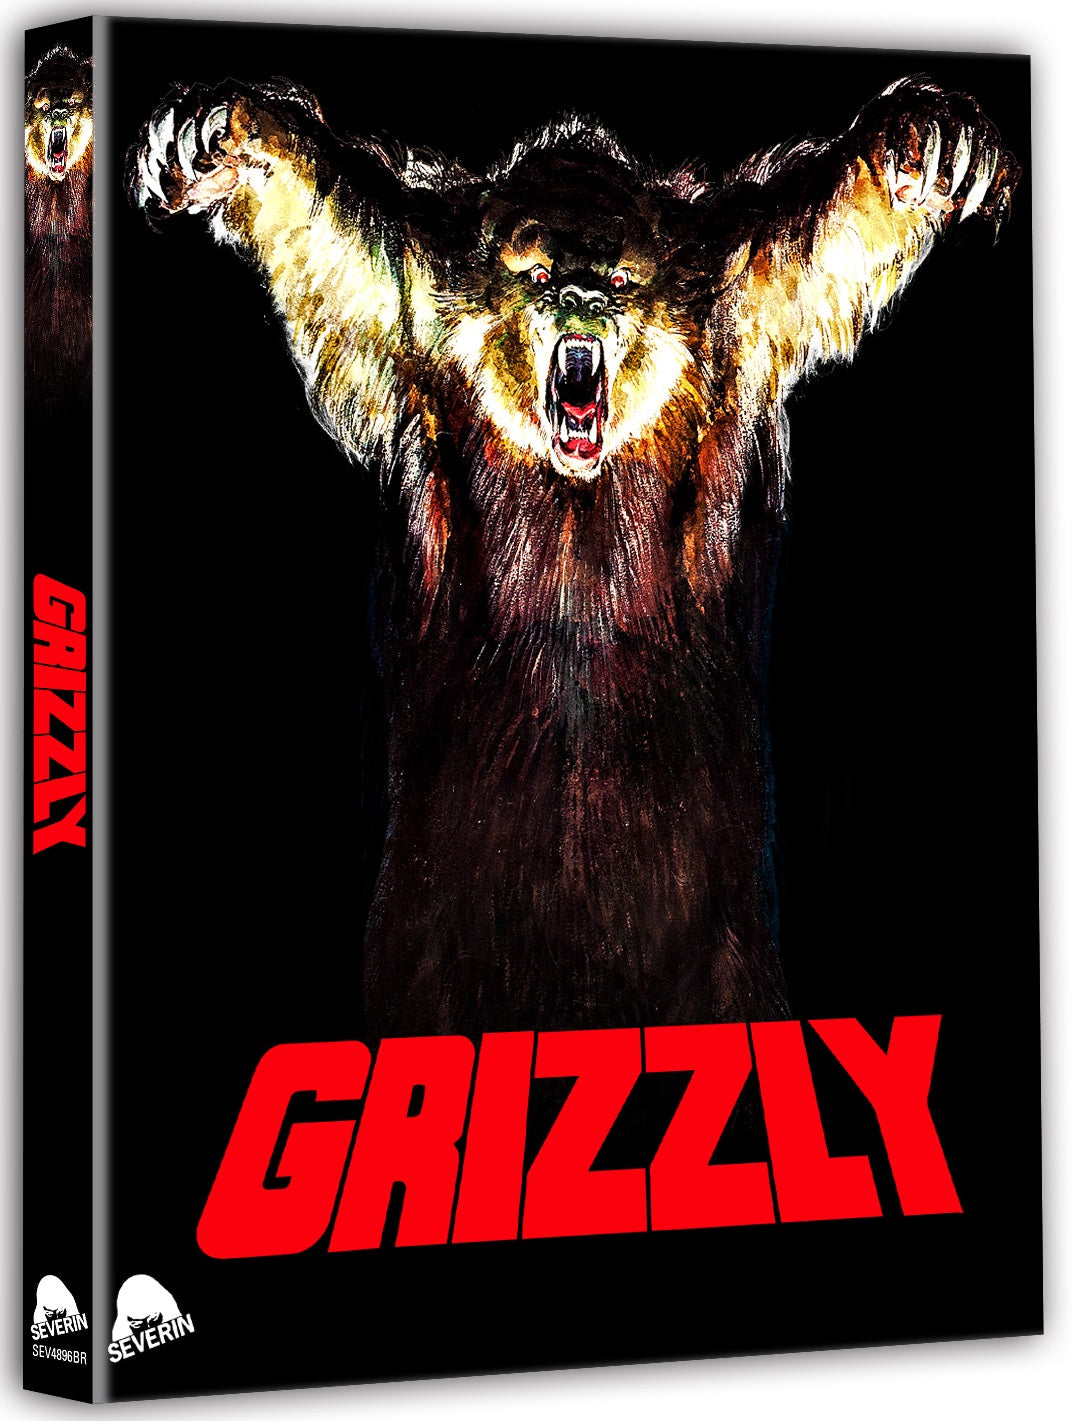 Grizzly [Blu-ray w/Exclusive Slipcover]